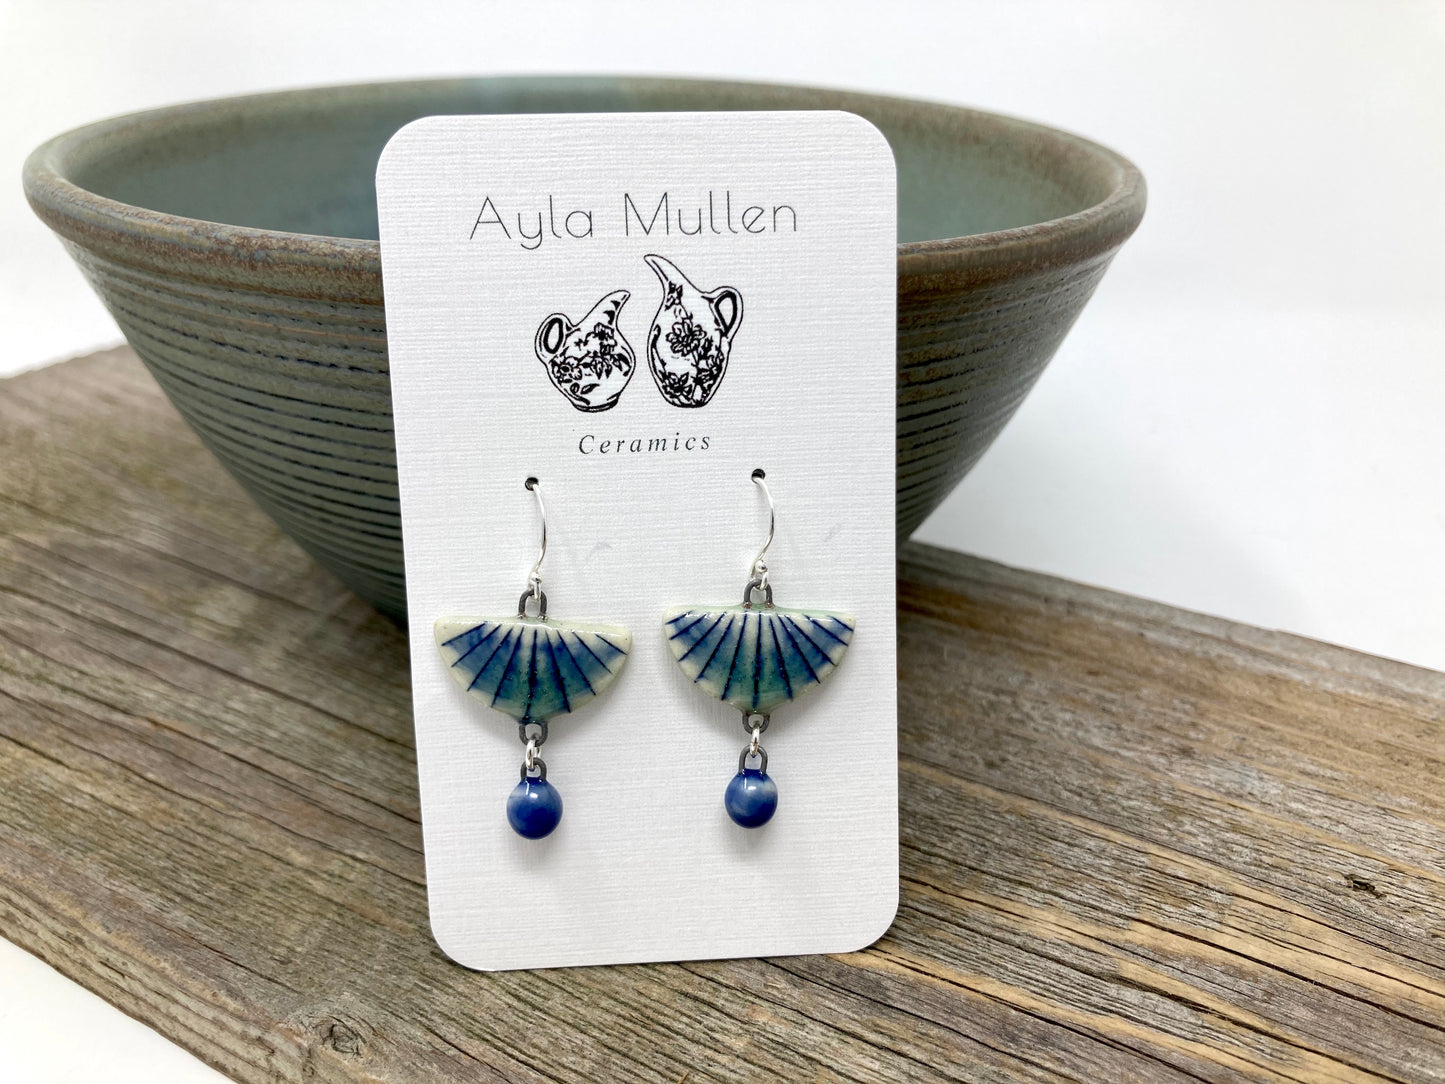 Striped Half-Circle Earrings with Blue Dangles